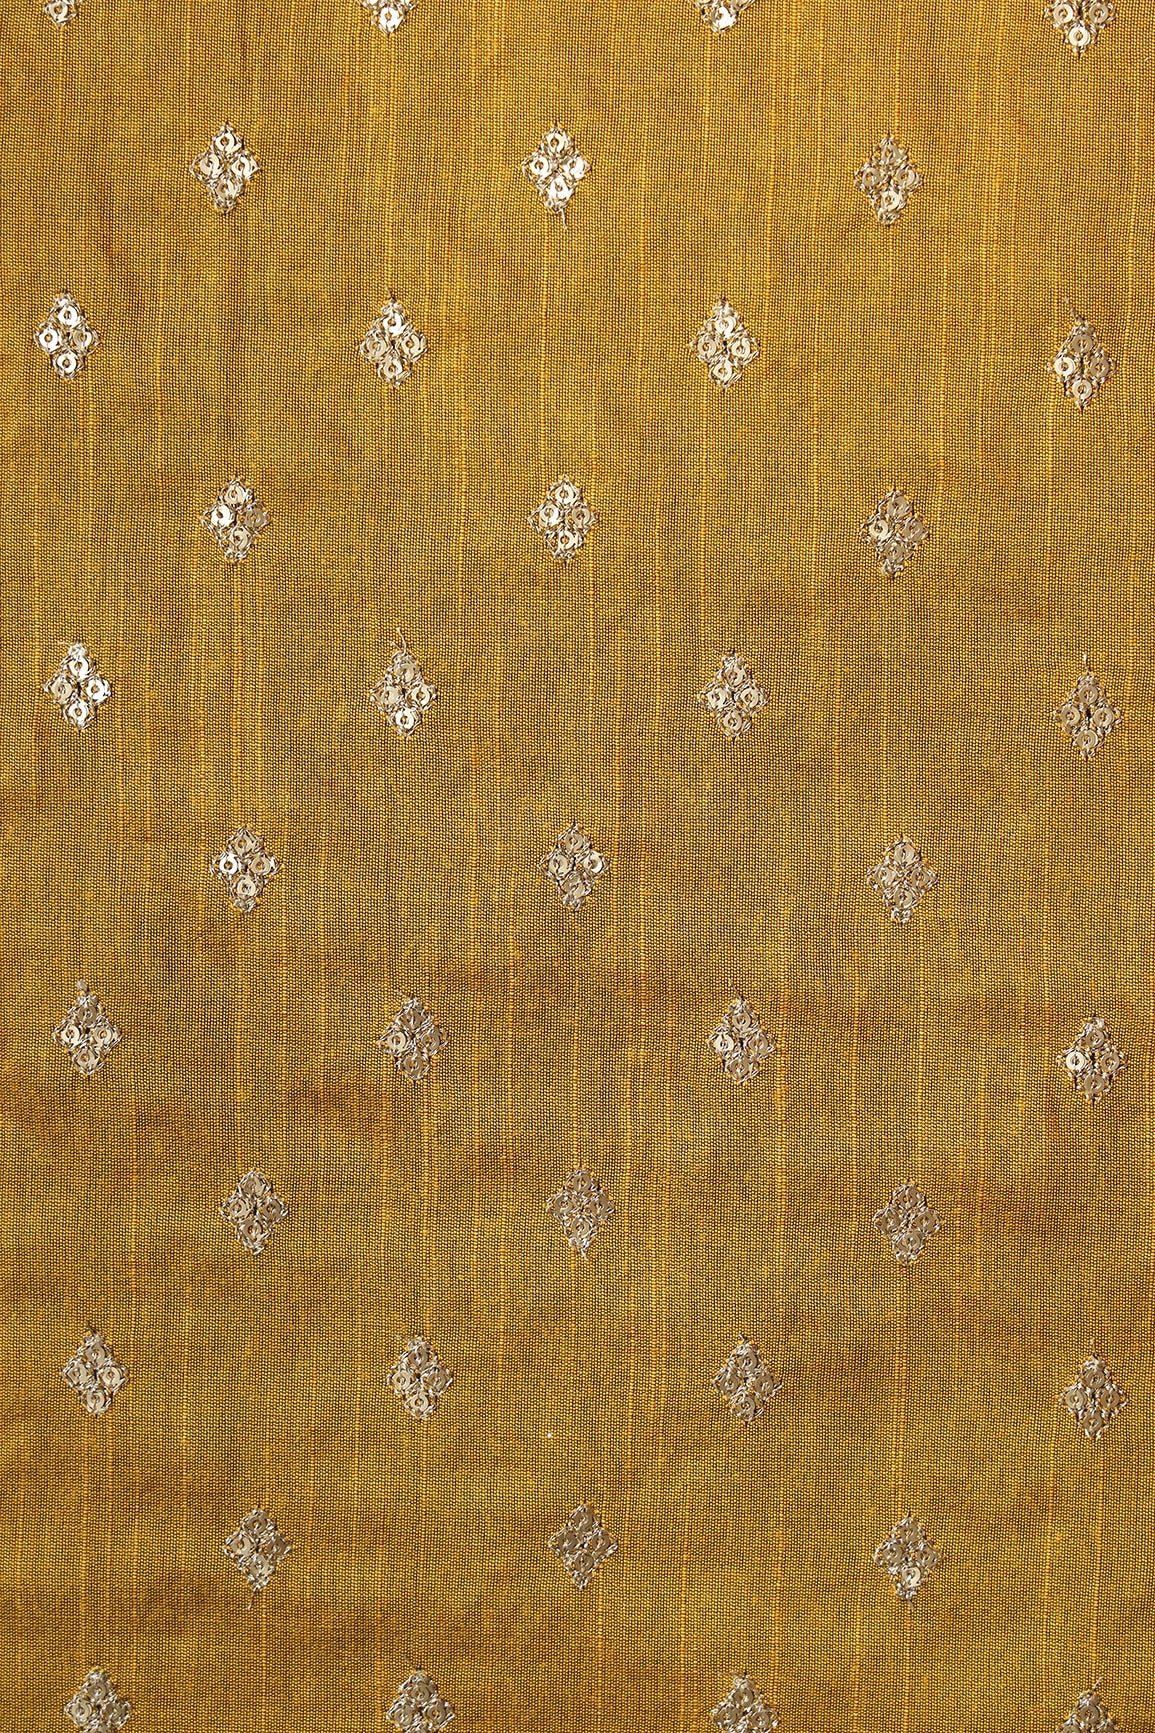 Gold Sequins With Gold Zari Small Motif Embroidery Work On Mustard Raw Silk Fabric